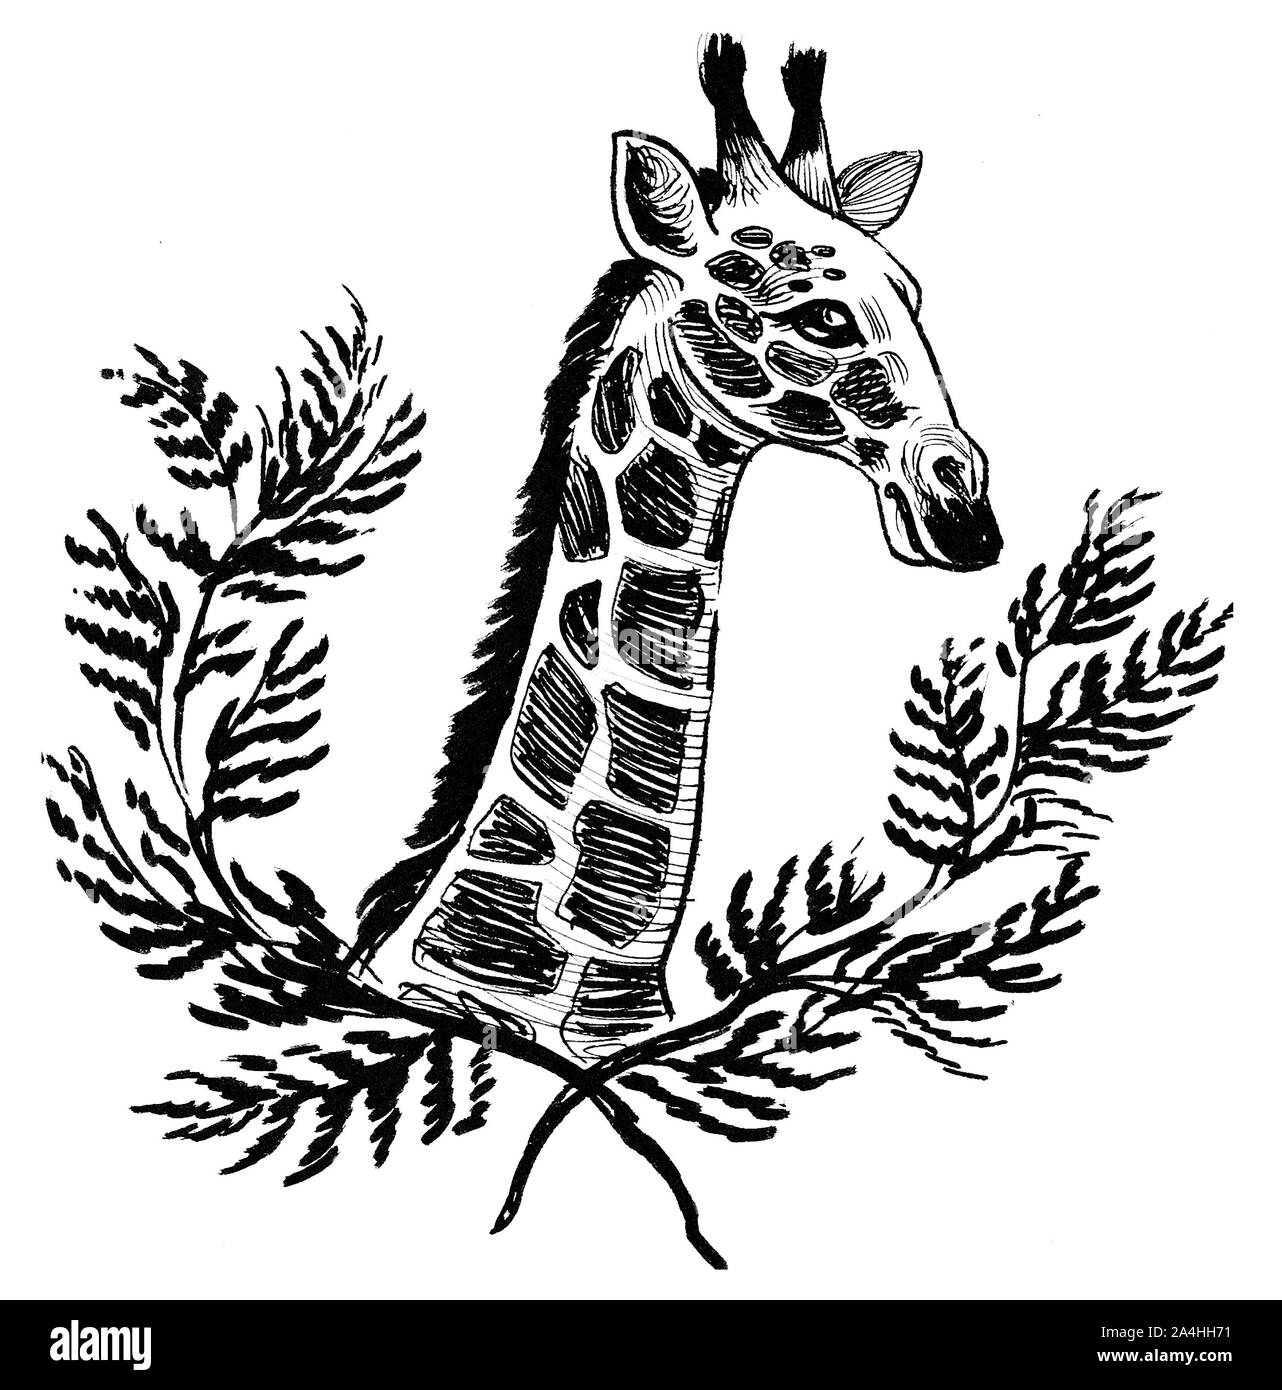 Giraffe head and neck with tree branches. Ink black and white drawing Stock Photo